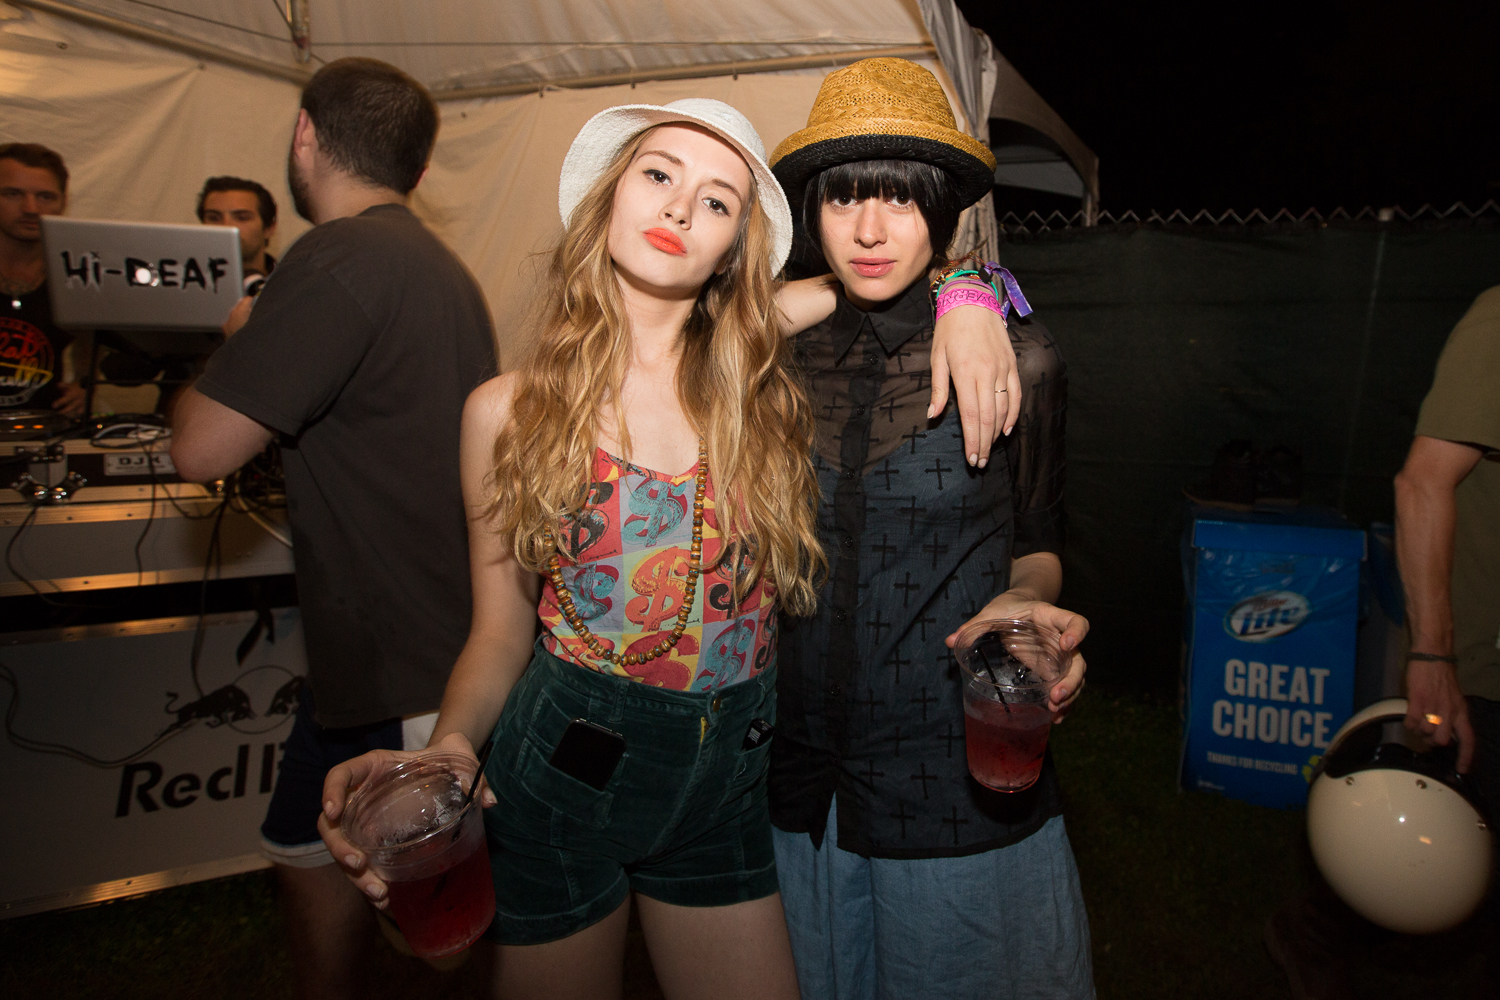 Governors Ball on Randalls Island on June 9, 2013